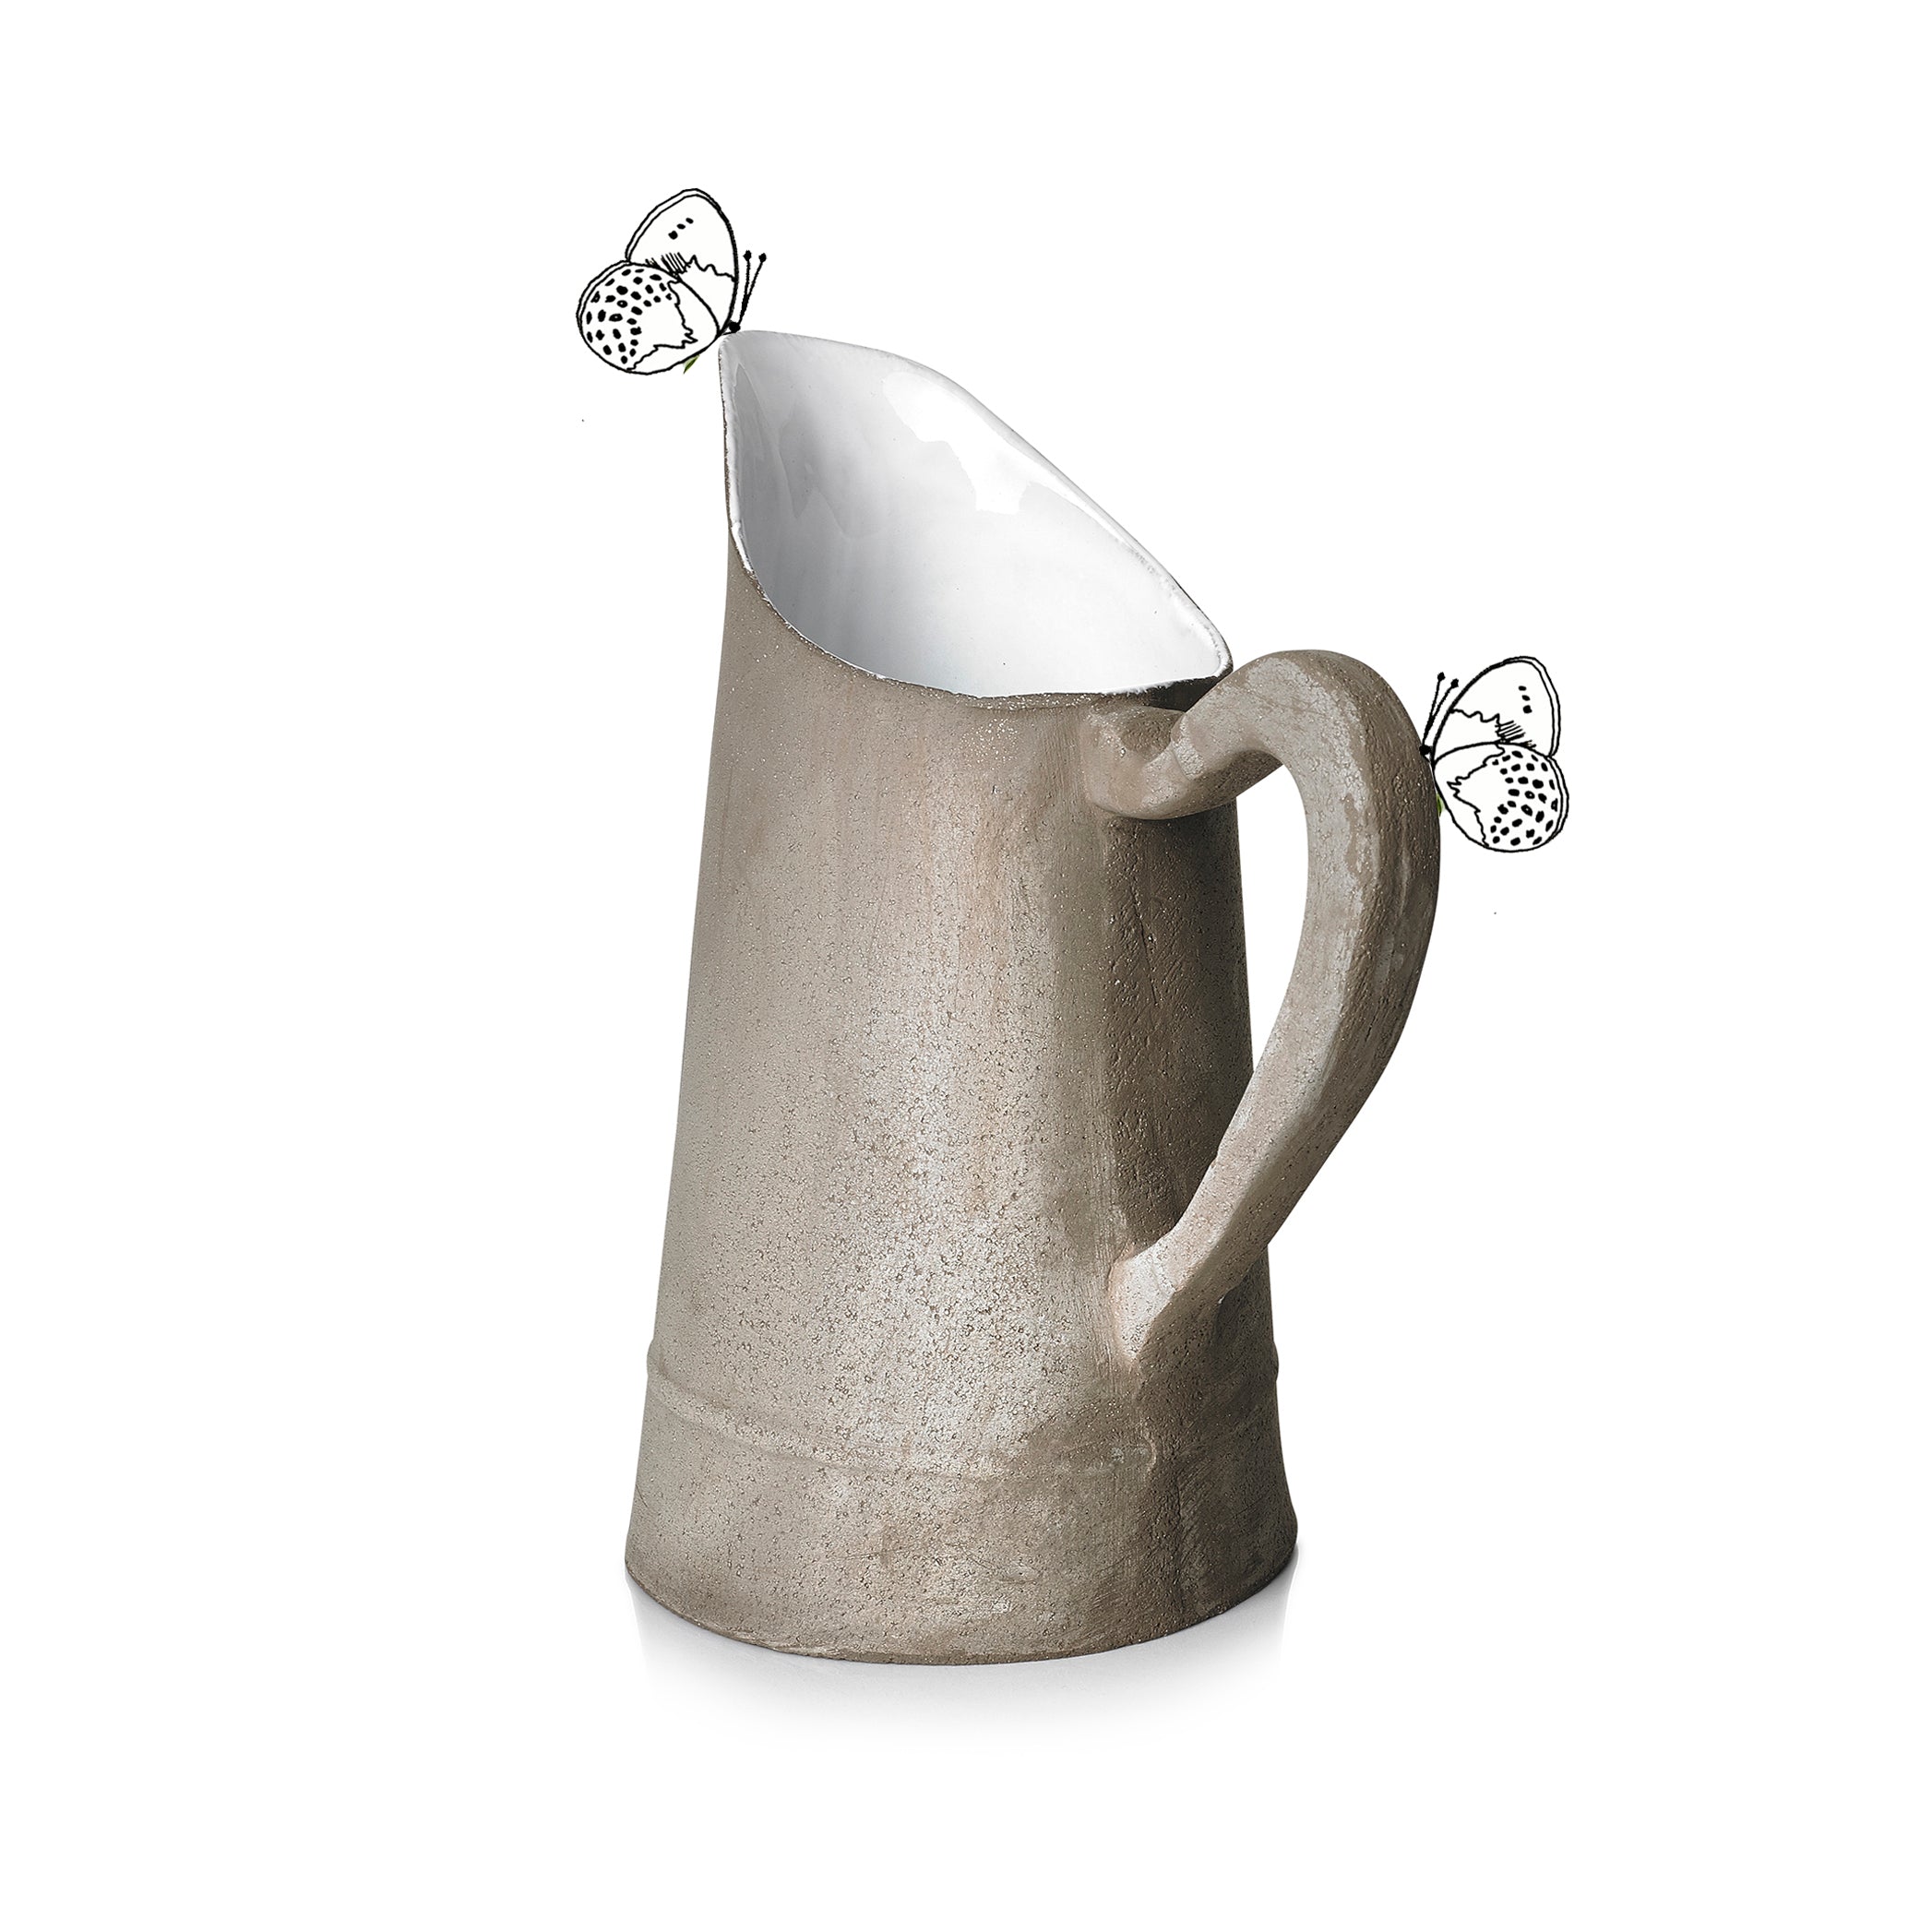 Simple Large Pitcher in Raw Clay by Astier de Villatte, 25cm